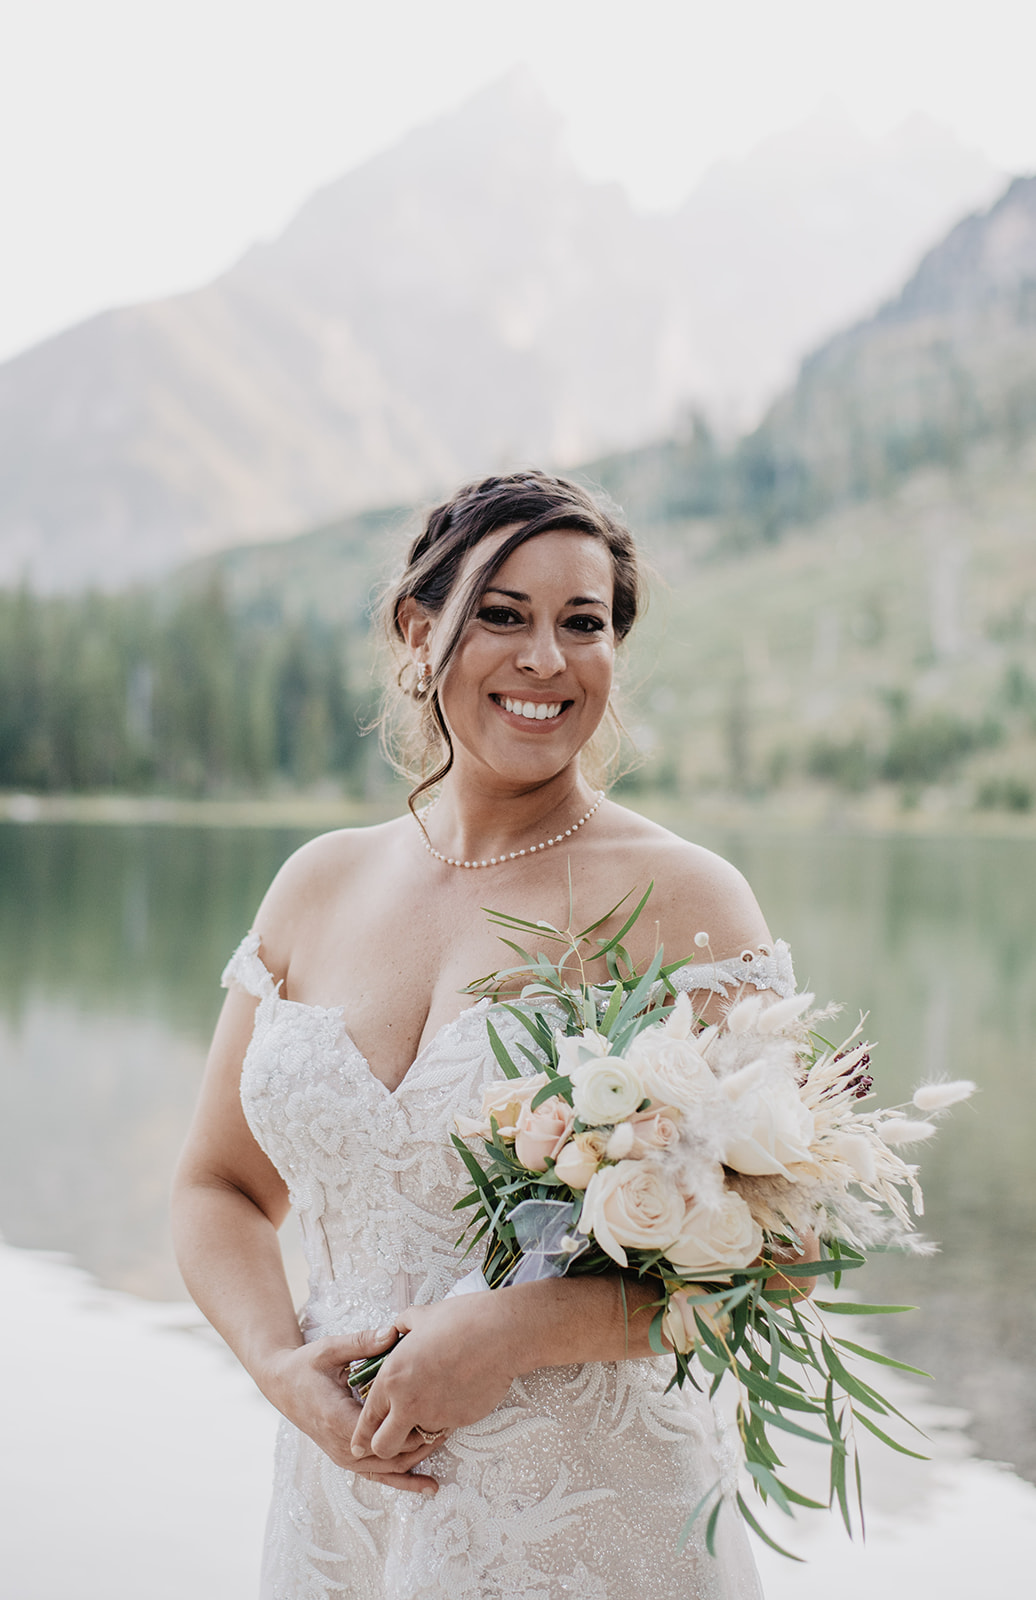 beautiful bride in lace wedding gown holding a bright white and pink wedding bouquet at String Lake for her bridal portraits with the Tetons and the water behind her 